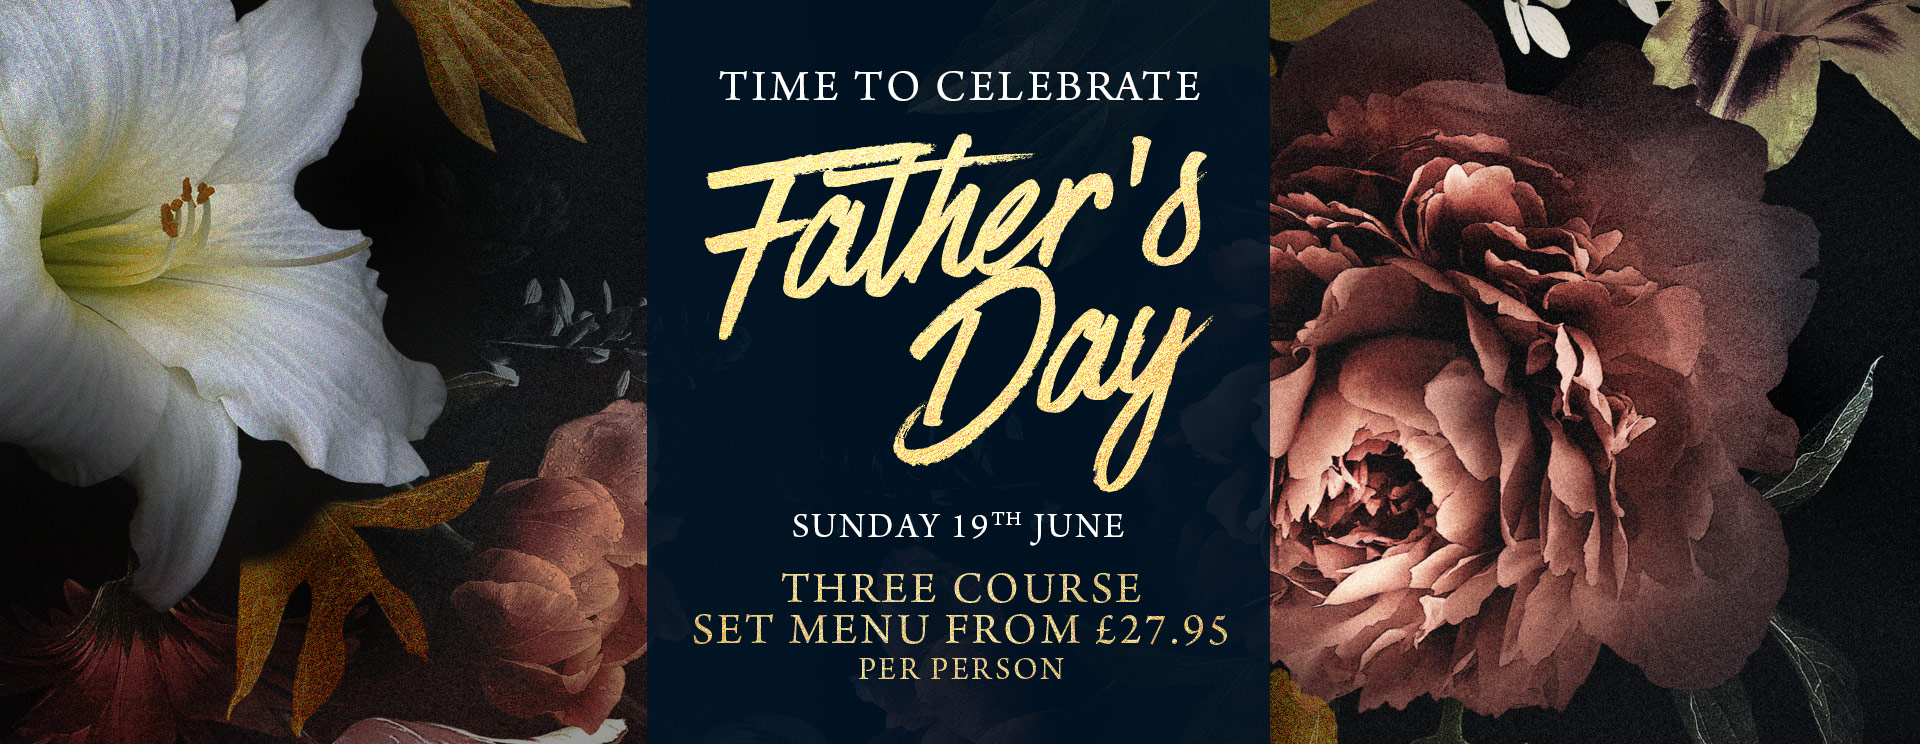 Fathers Day at The White Horse